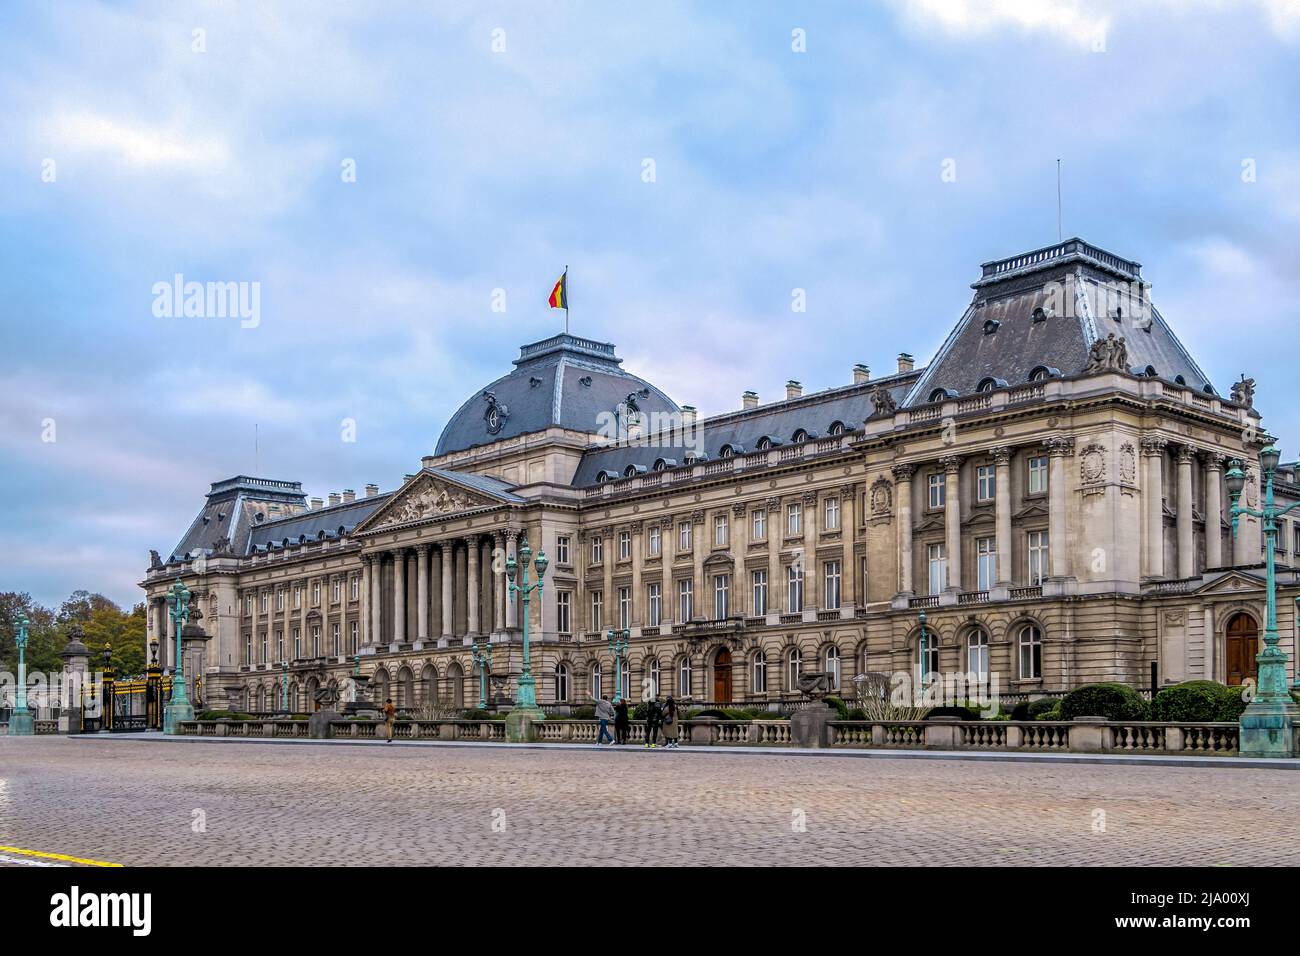 Brussels, Belgium - November 11, 2021: Panoramic view of The Royal Palace of Brussels, the official palace of the King and Queen of the Belgium locate Stock Photo